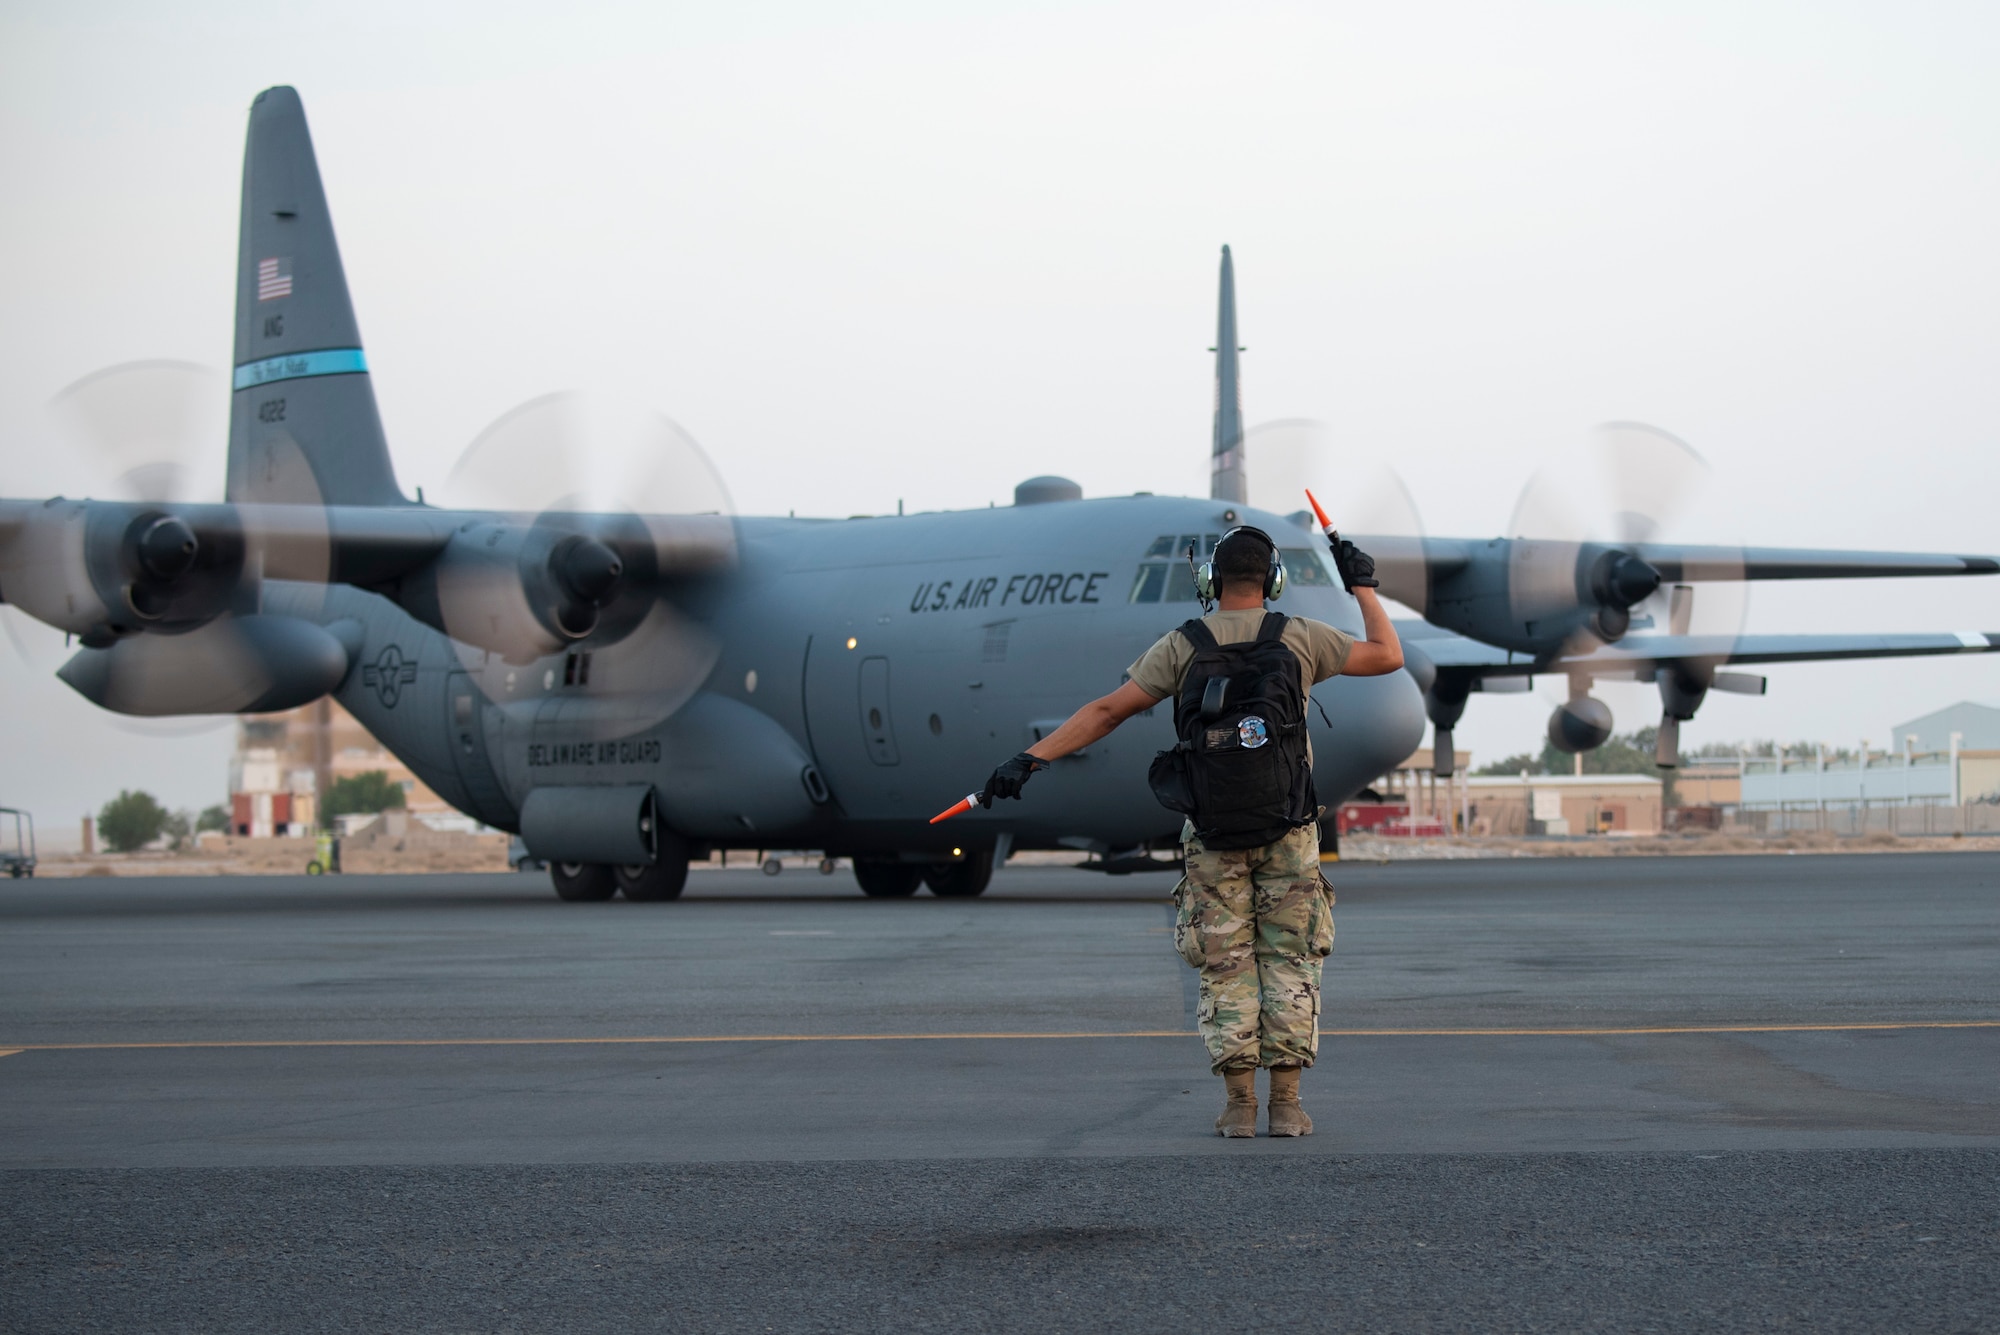 A U.S. Air Force crew chief assigned to Ali Al Salem Air Base, Kuwait, marshals in a C-130 Hercules July 20, 2021. The EAMXS works 24-hour operations year-round to keep the C-130 Hercules’ in flight to accomplish the mission of fight to win today and to provide warfighter support in the area of responsibility. (U.S. Air Force Photo by Senior Airman Helena Owens)